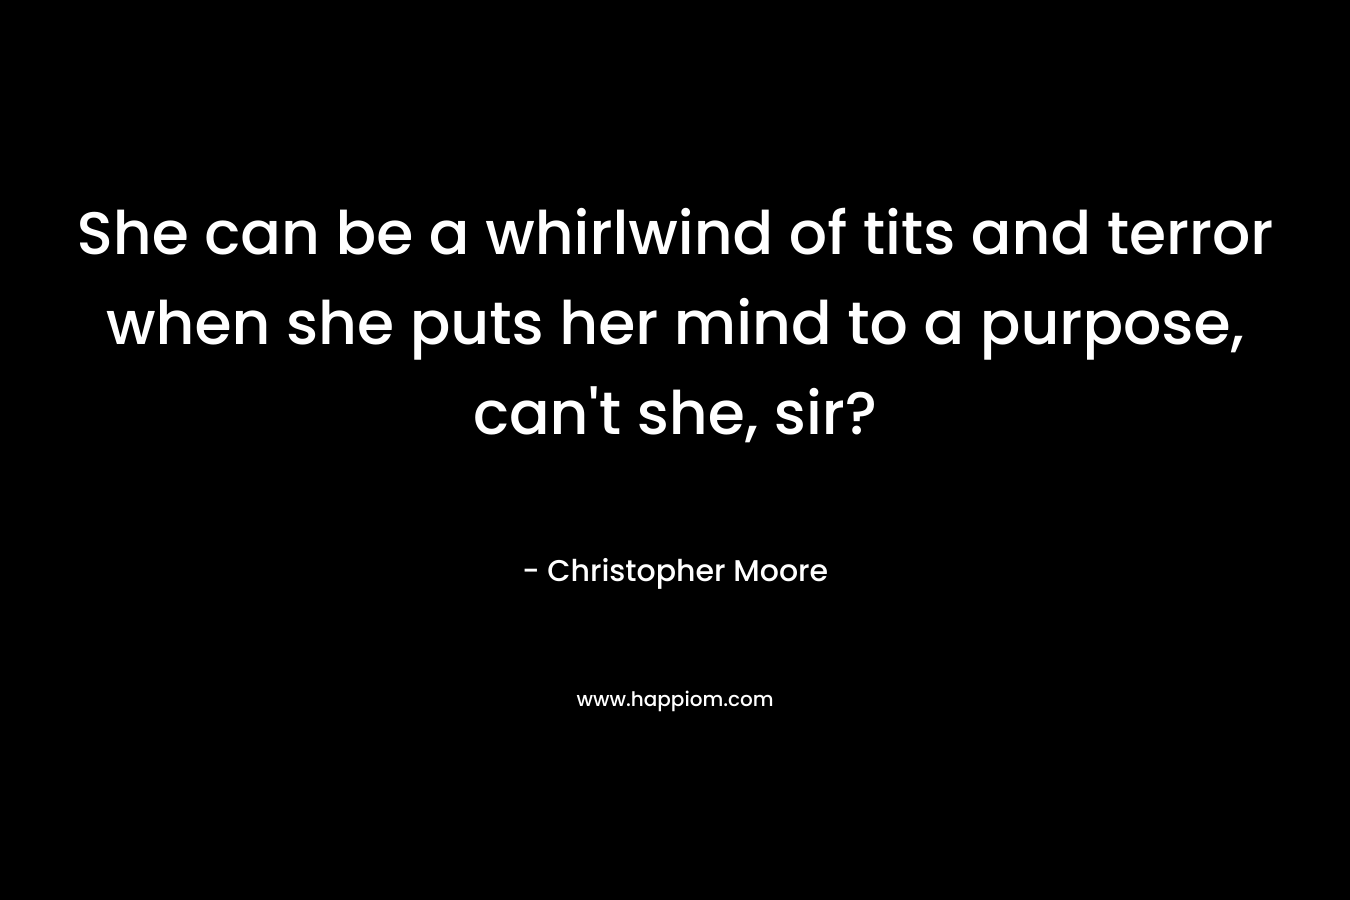 She can be a whirlwind of tits and terror when she puts her mind to a purpose, can’t she, sir? – Christopher Moore